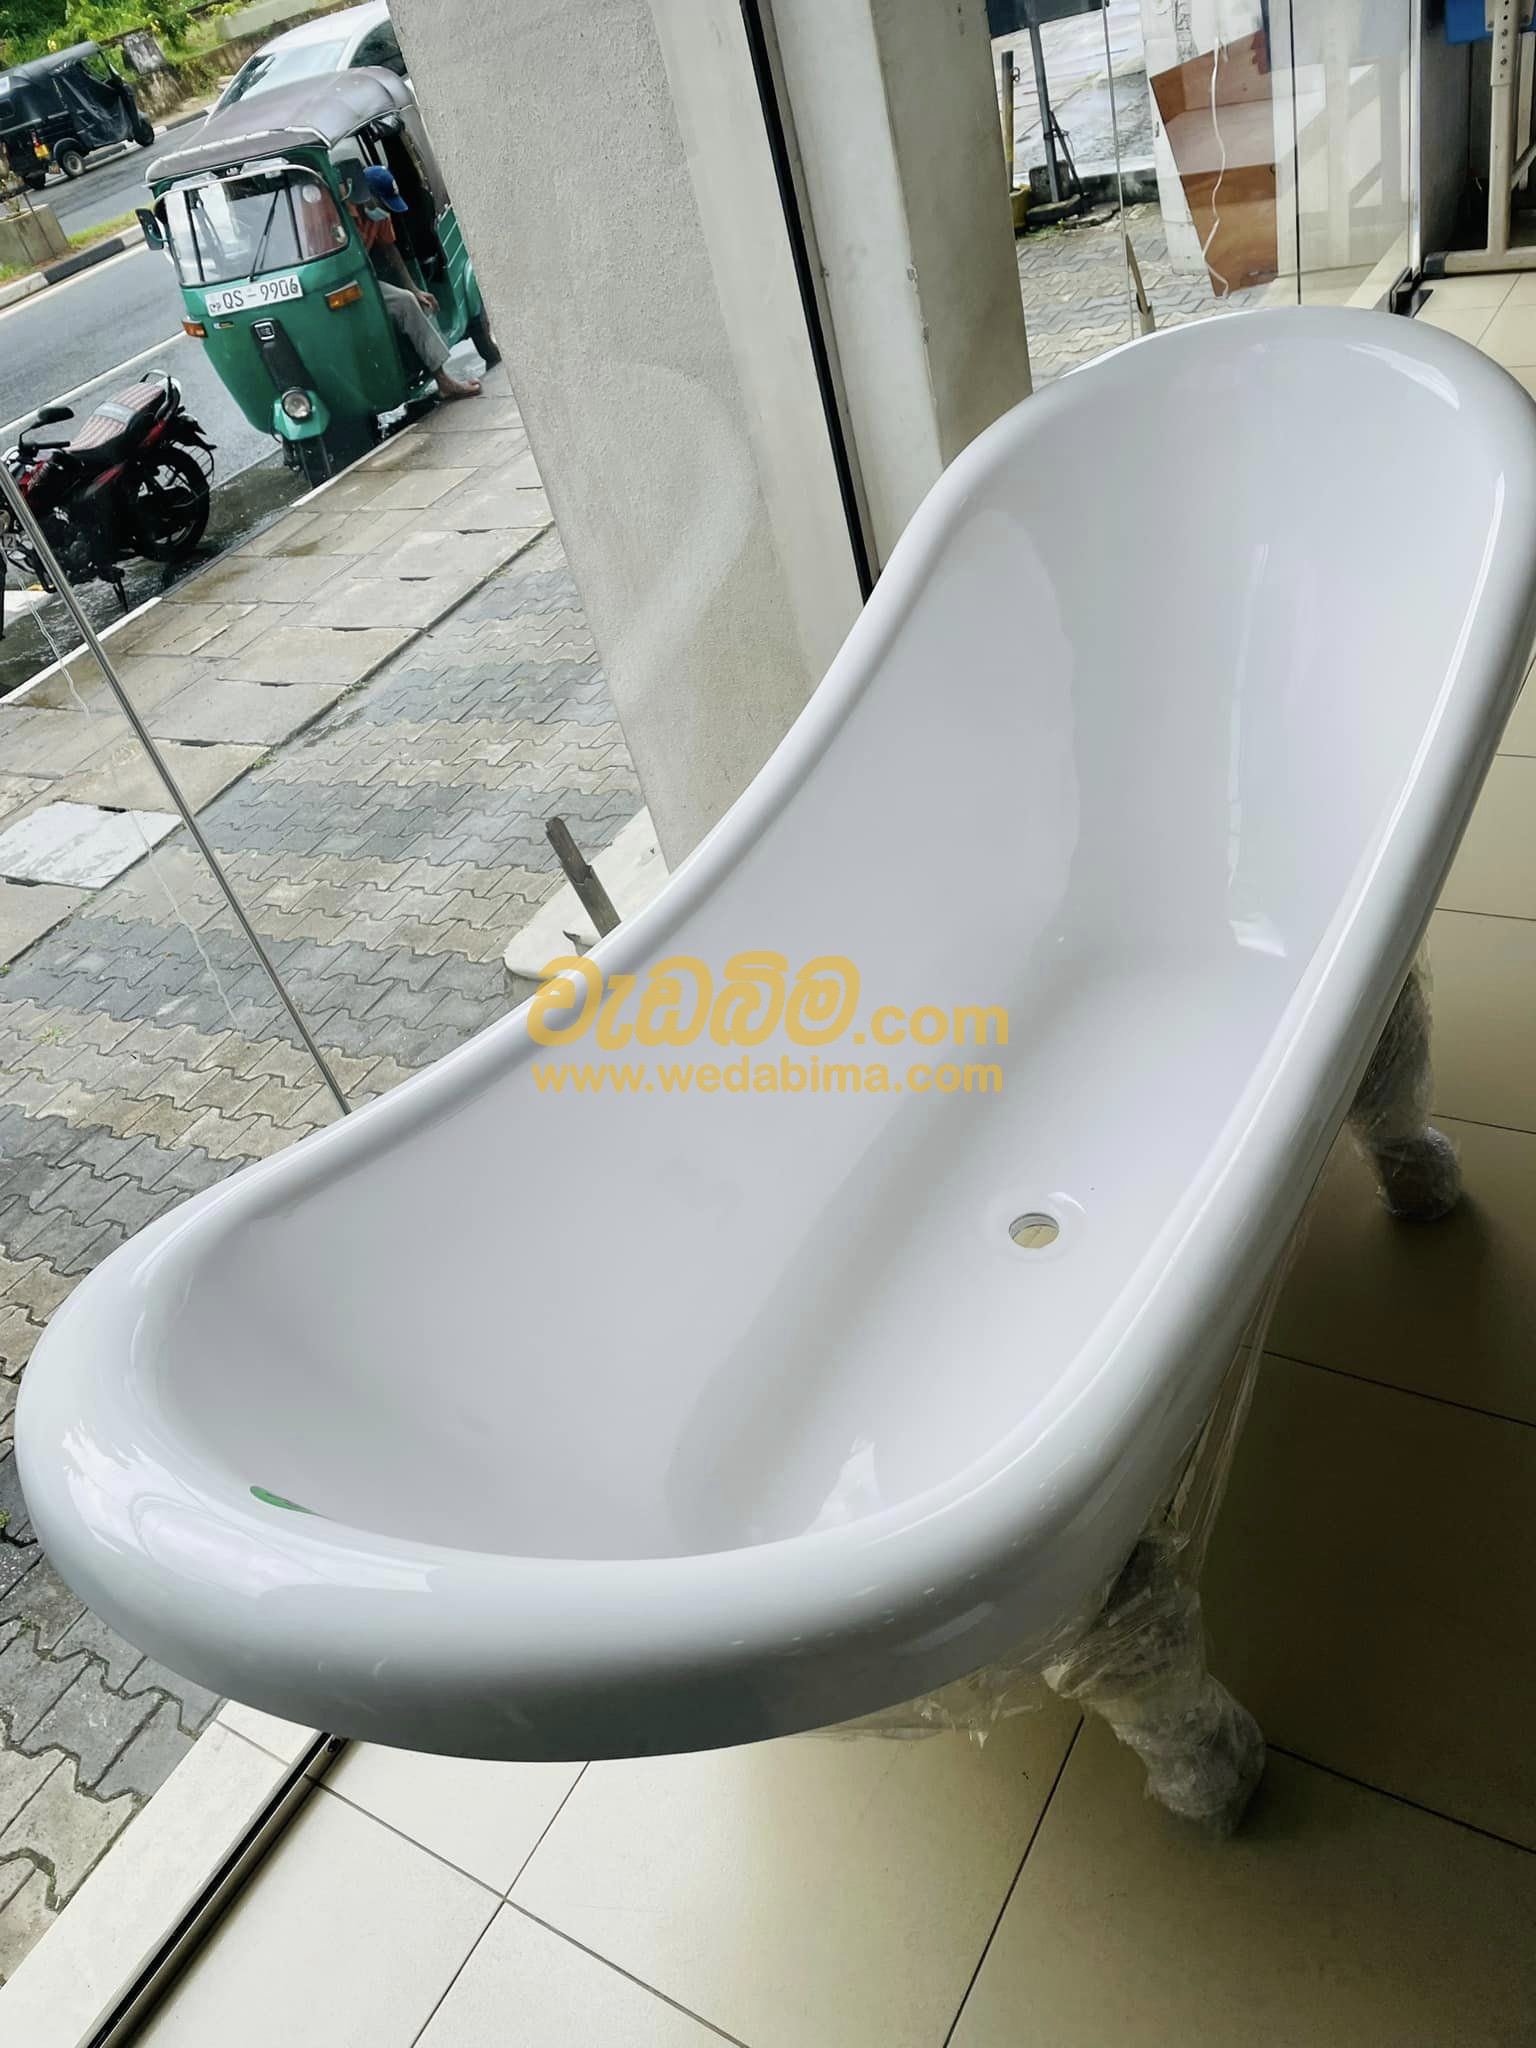 Cover image for Bathtubs Price In Kandy